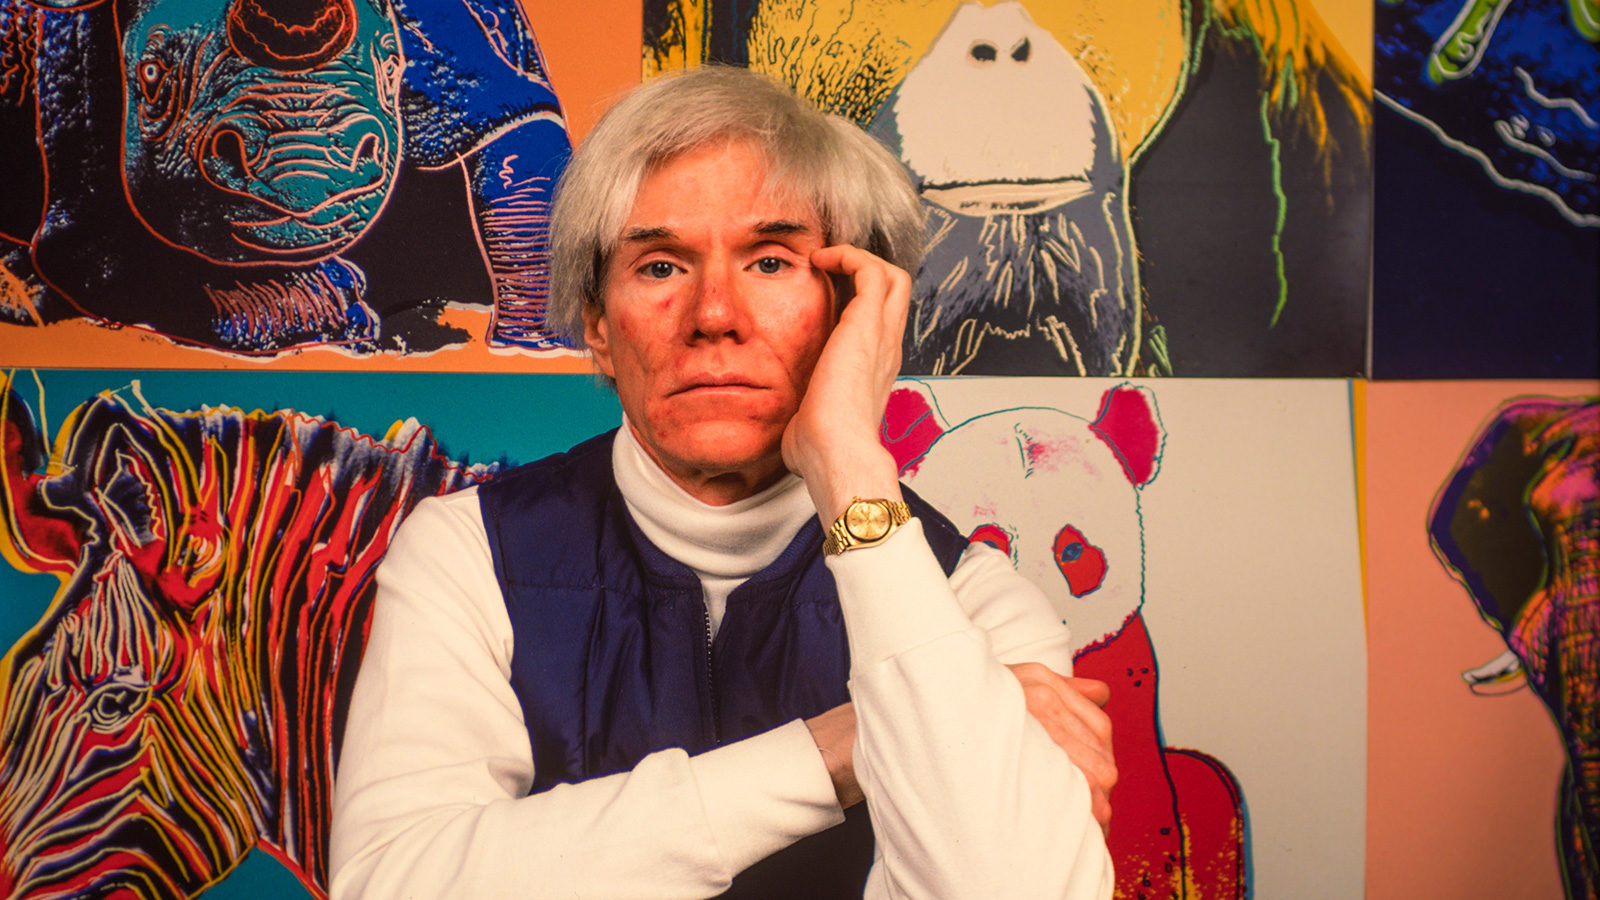 American Pop artist Andy Warhol (1928 - 1987) sits in front of several paintings in his 'Endangered...